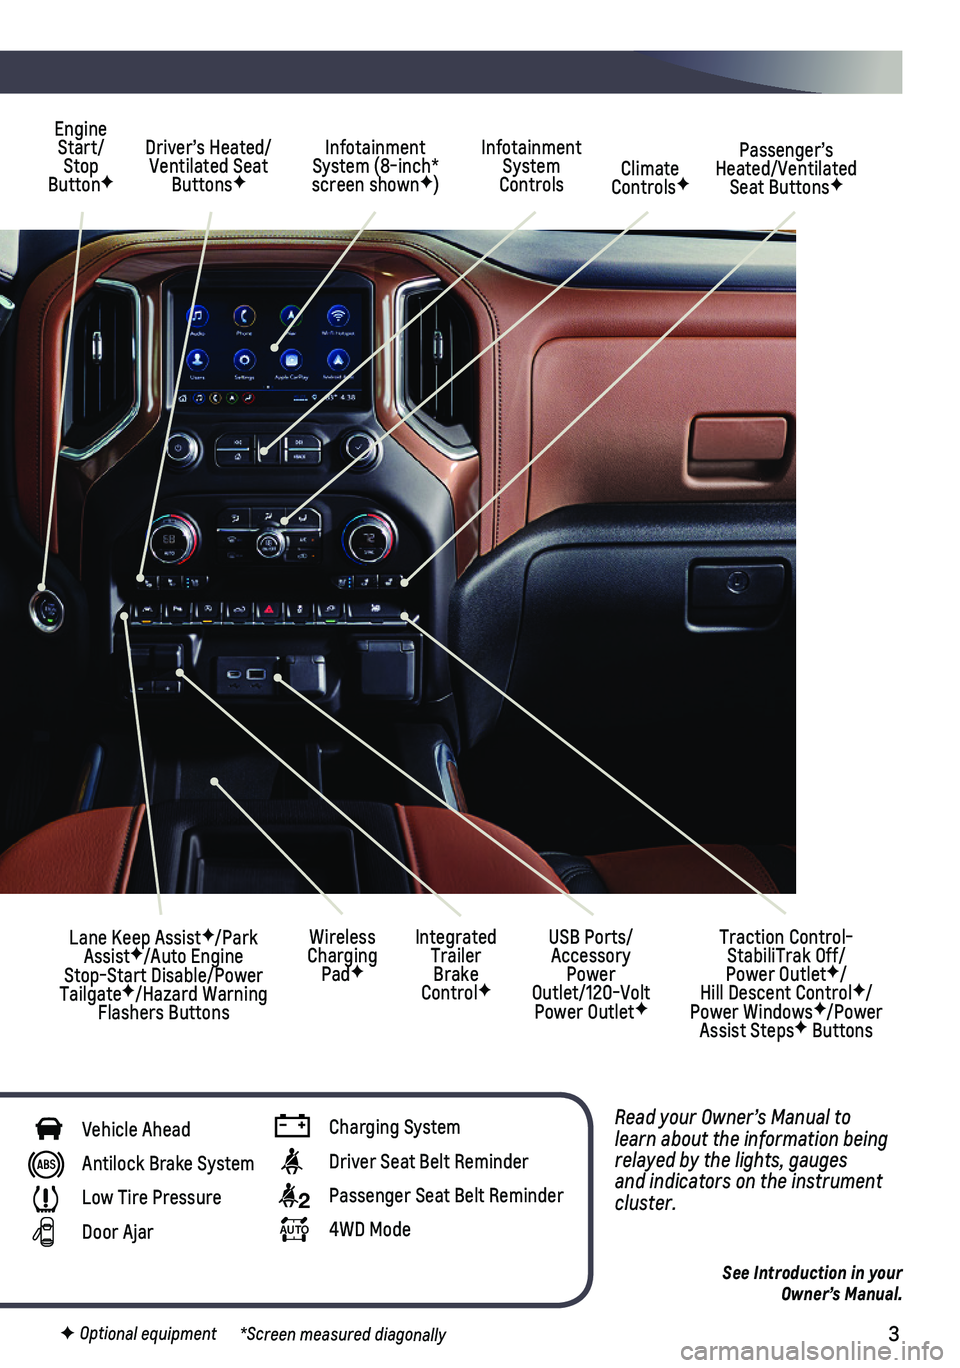 CHEVROLET SILVERADO 1500 2021  Get To Know Guide 3
Read your Owner’s Manual to learn about the information being relayed by the lights, gauges and indicators on the instrument cluster.
See Introduction in your  Owner’s Manual.
Driver’s Heated/